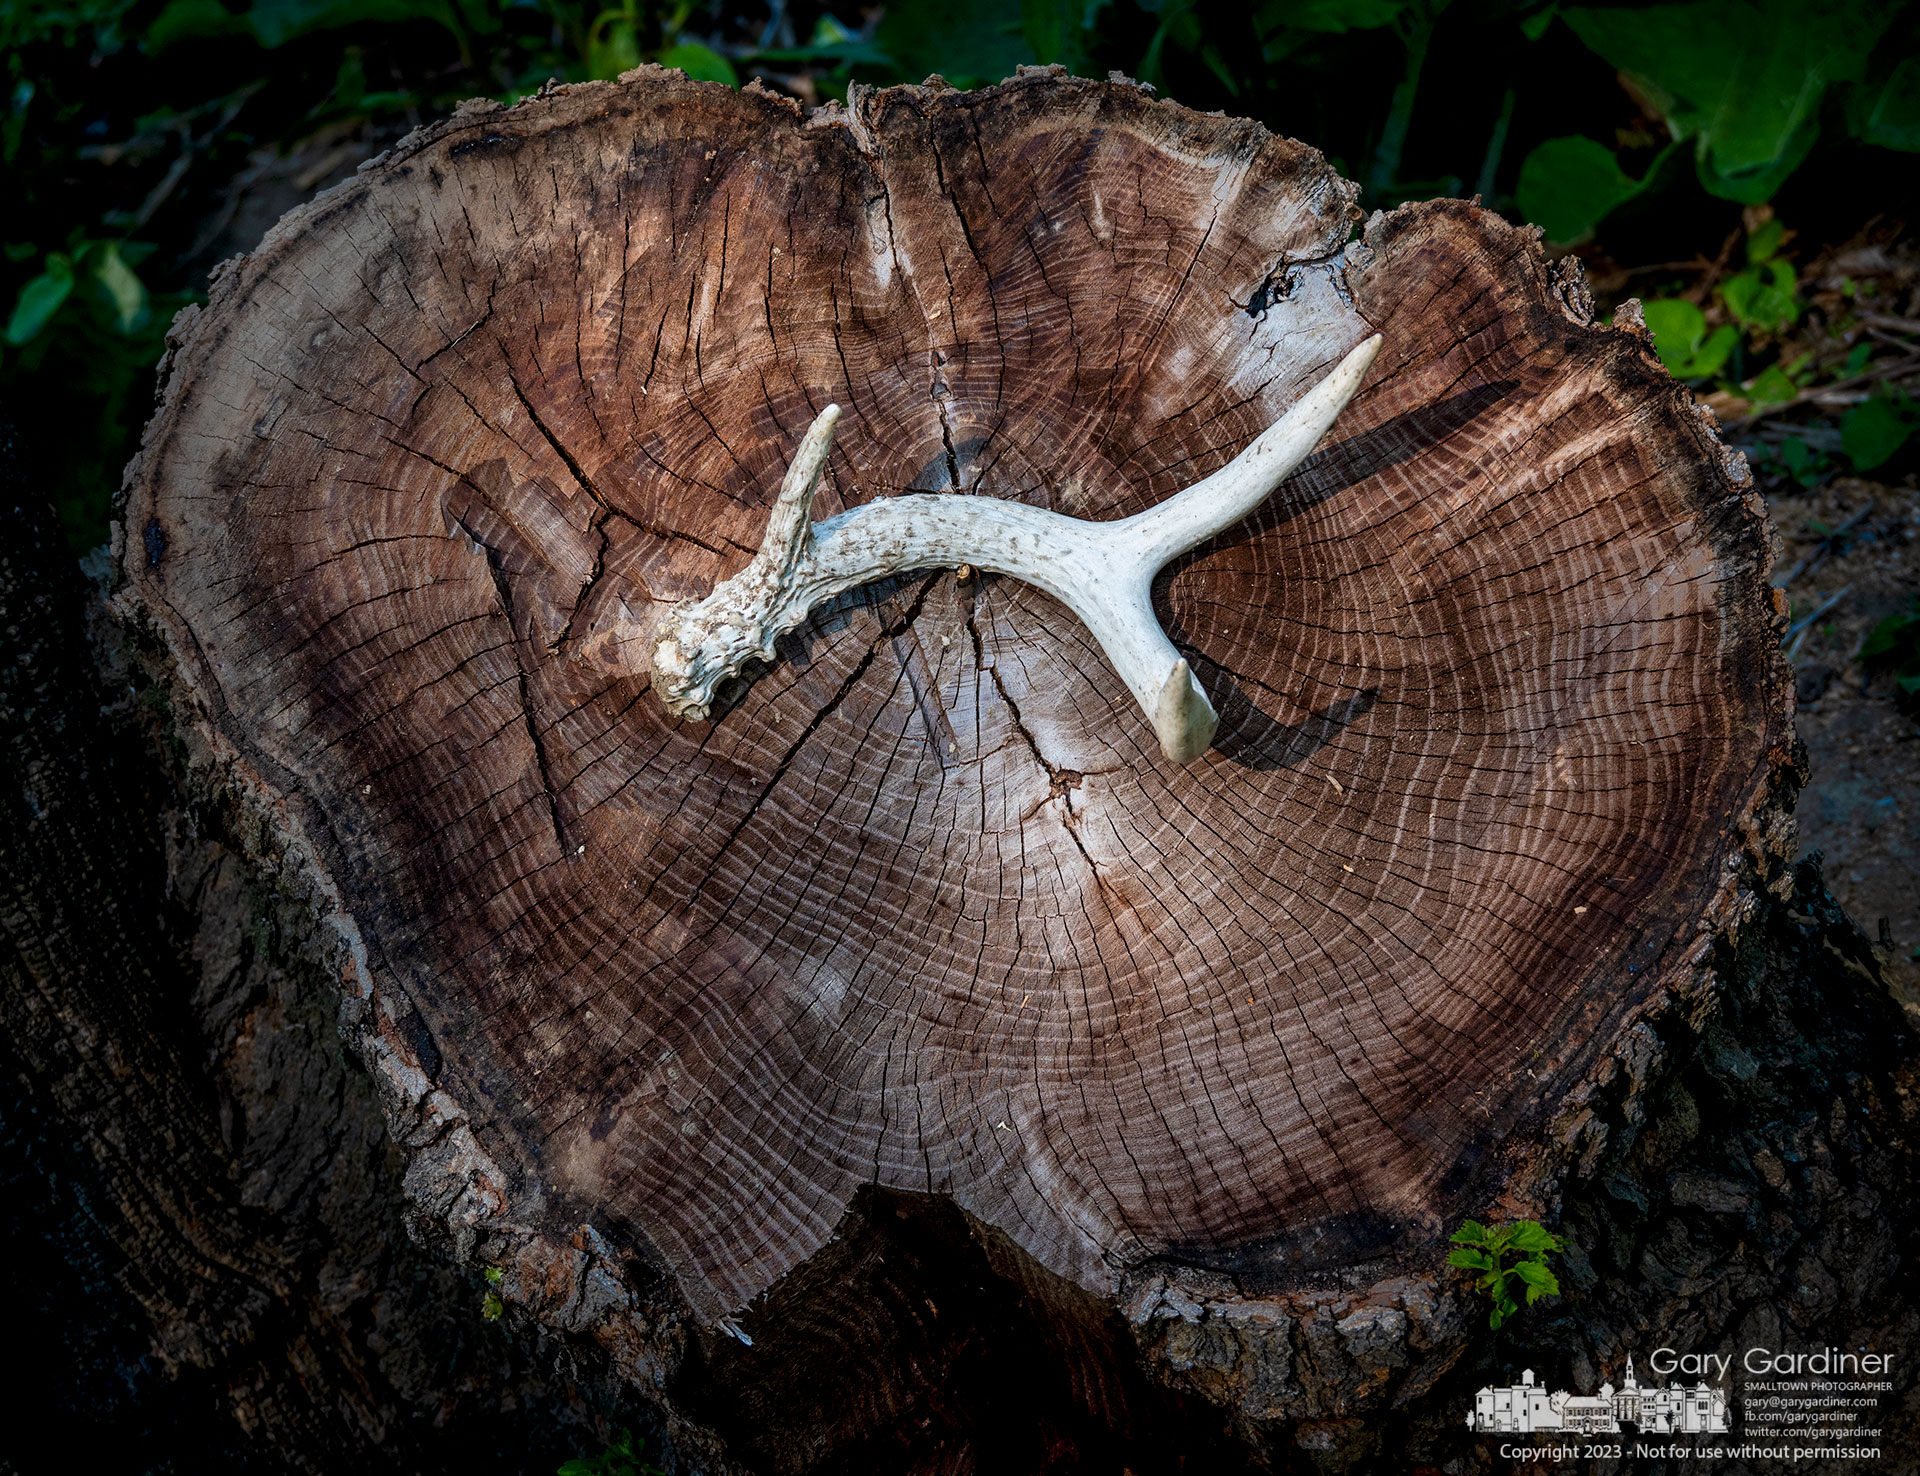 A single three-point antler is displayed on the stump of a downed tree on the Braun Farm after it was found by a farmer plowing the fields to plant soybeans and corn. My Final Photo for May 18, 2023.